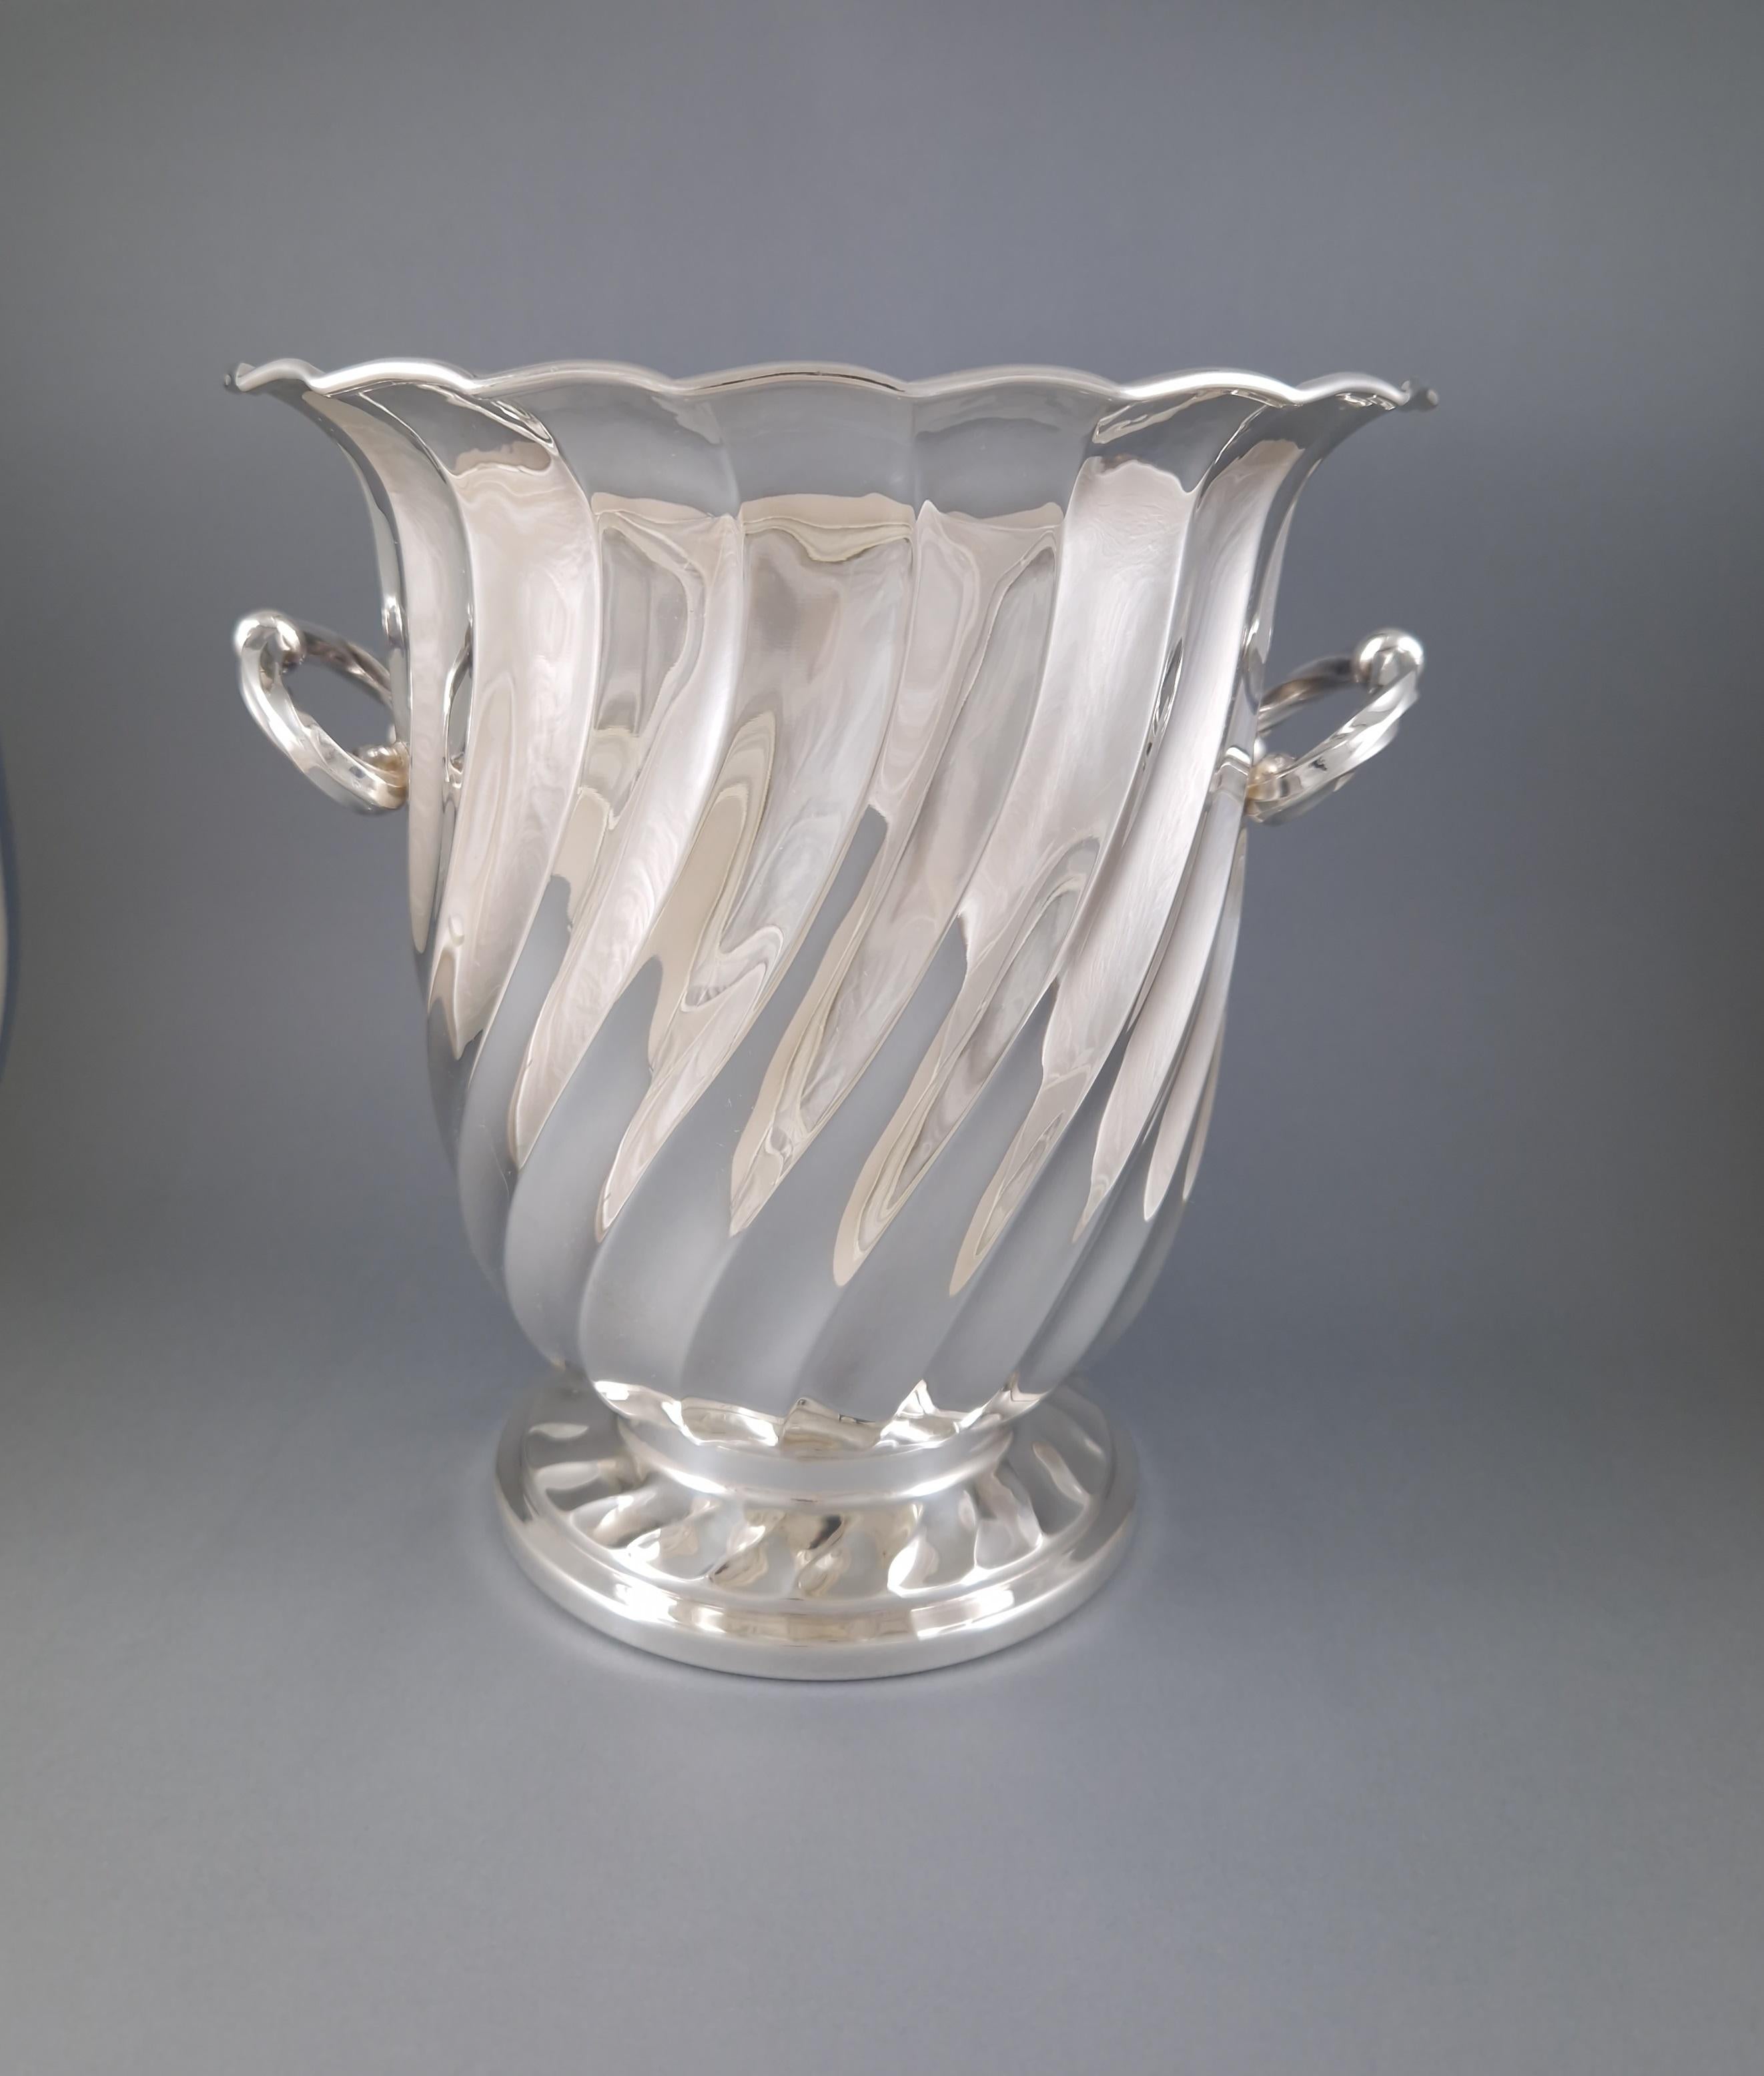 Nice champagne bucket in Sterling Silver 

Italian work from the 20th century by Miracoli 

Silver hallmark 800 
Height: 22.4 cm  - 8.8 inches
Diameter without the handles: 20.5 cm - 8 inches
Weight: 1105 grams